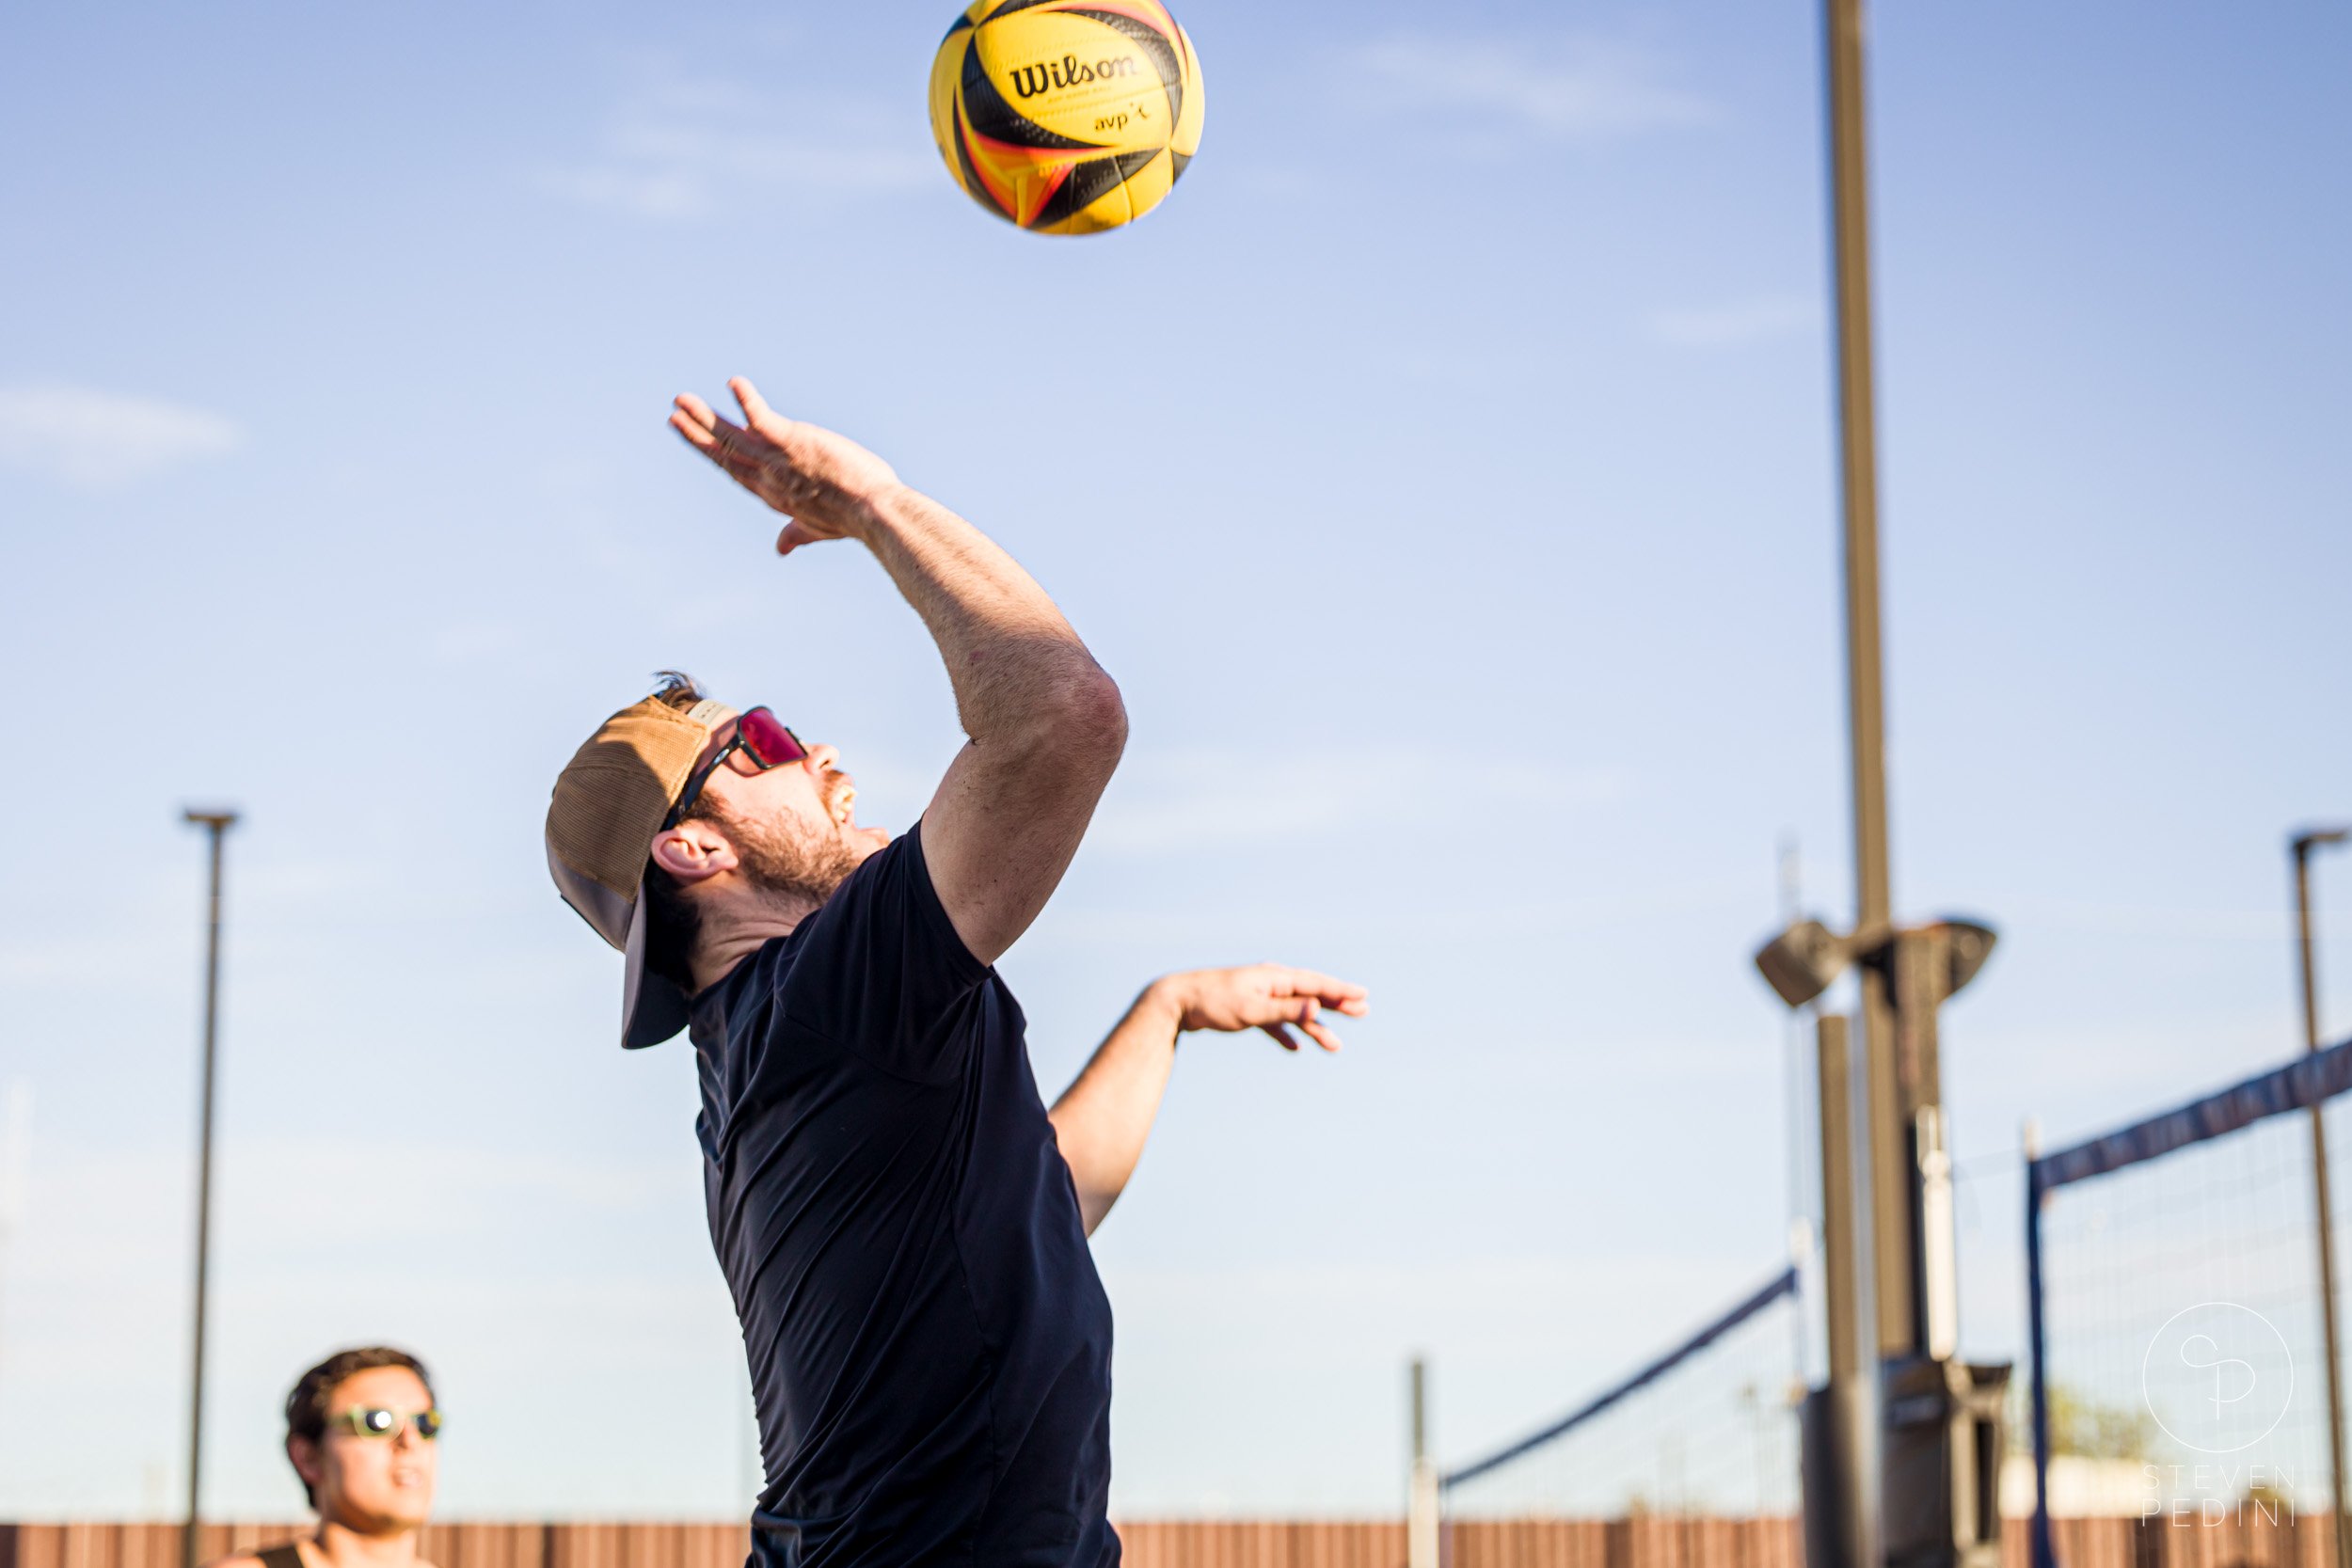 Steven Pedini Photography - Bumpy Pickle - Sand Volleyball - Houston TX - World Cup of Volleyball - 00111.jpg